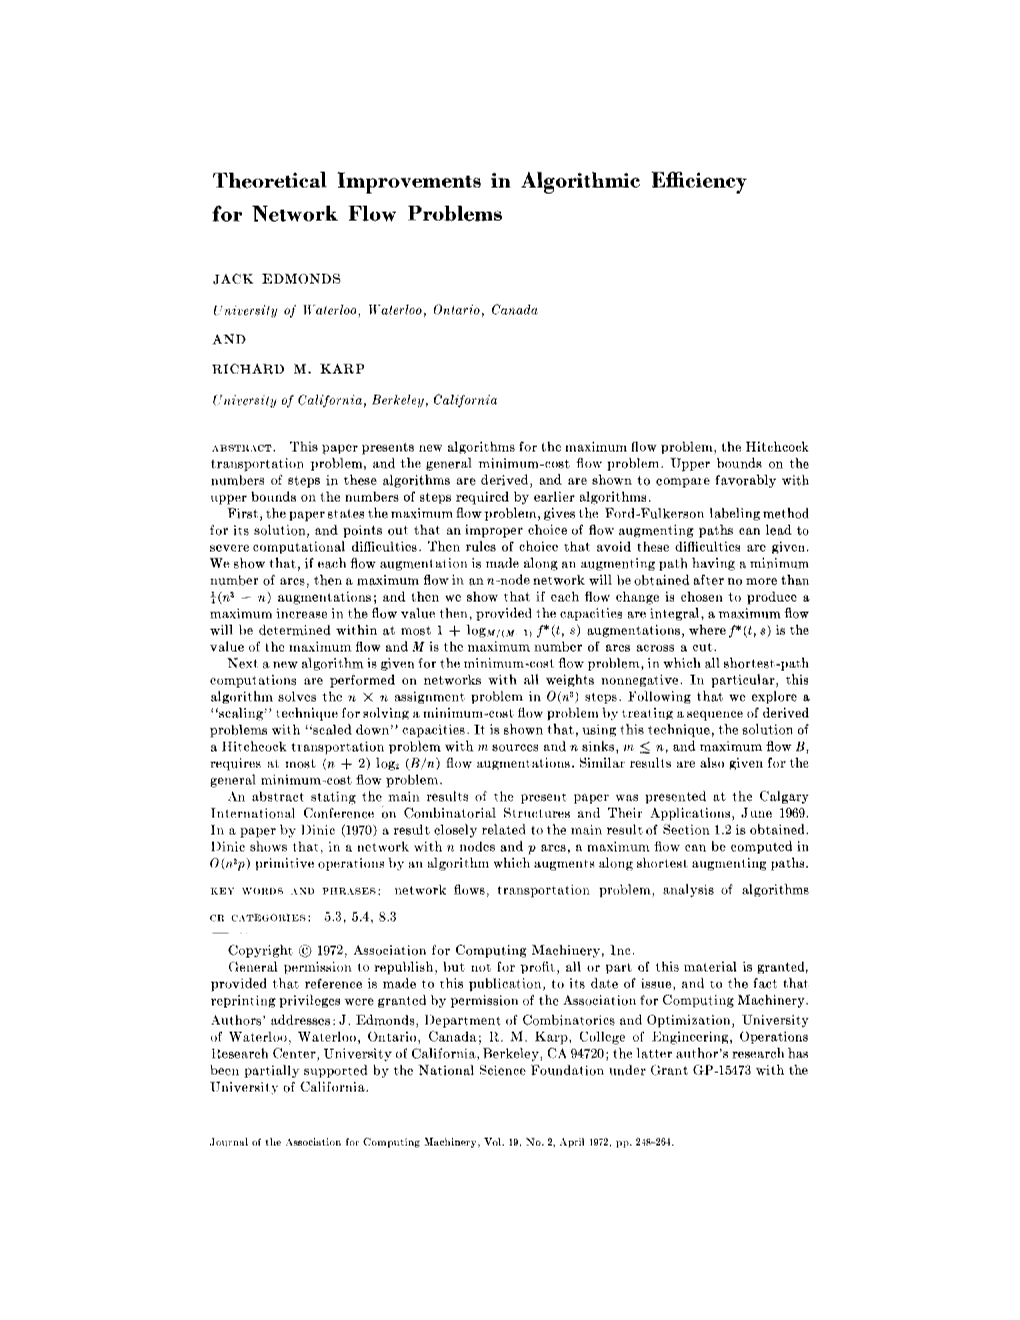 Theoretical Improvements in Algorithmic Efficiency for Network Flow Problems